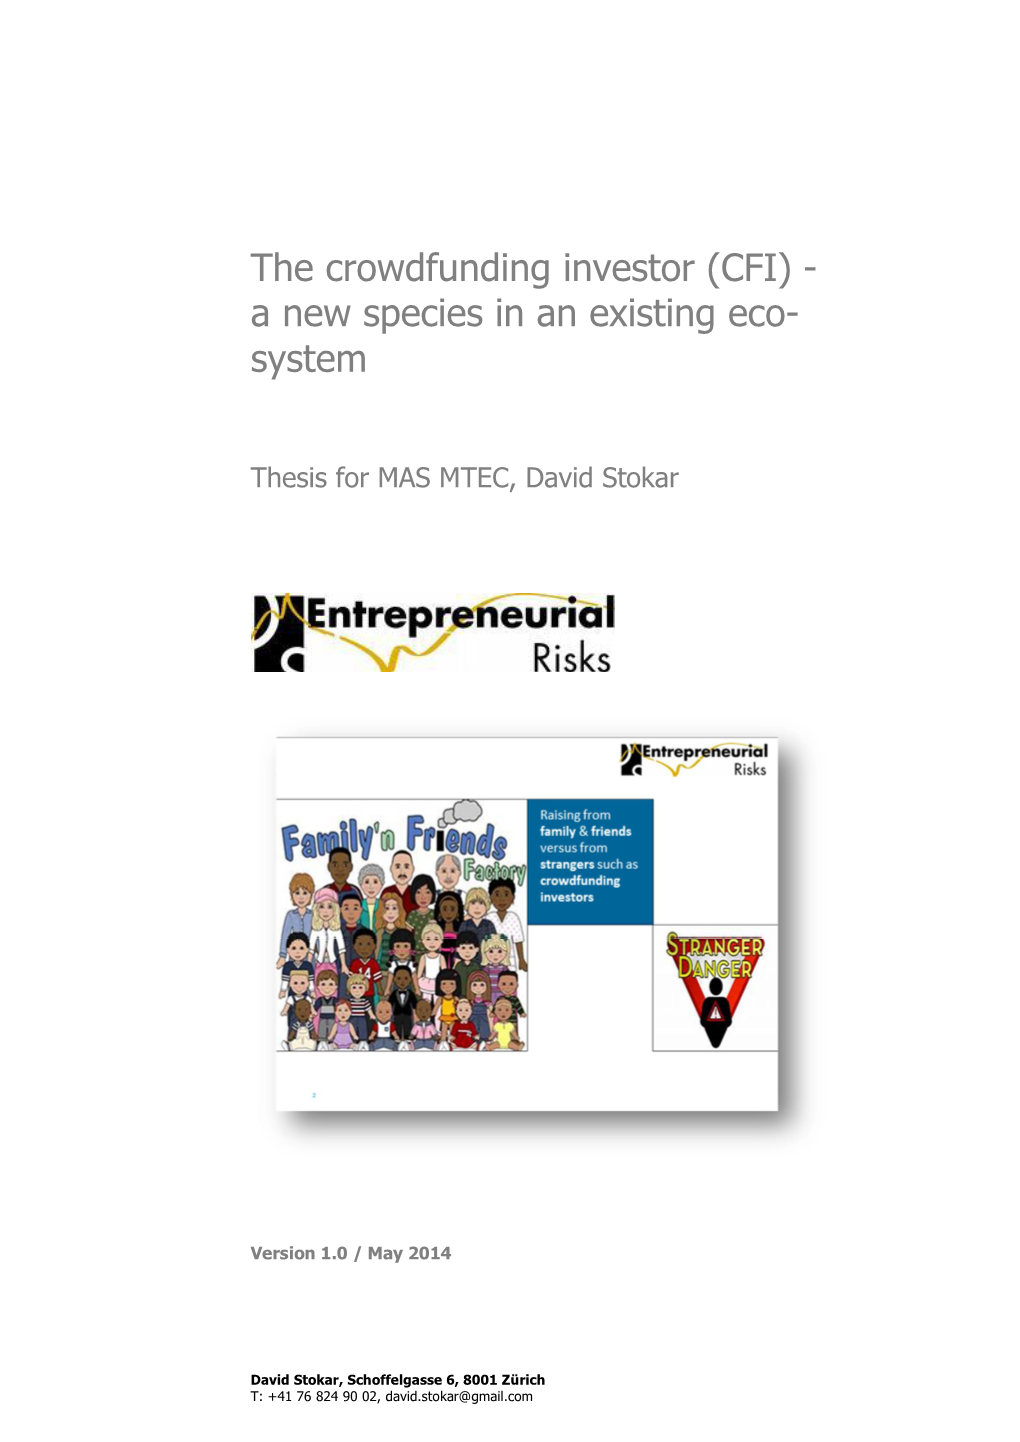 The Crowdfunding Investor (CFI) - a New Species in an Existing Eco- System